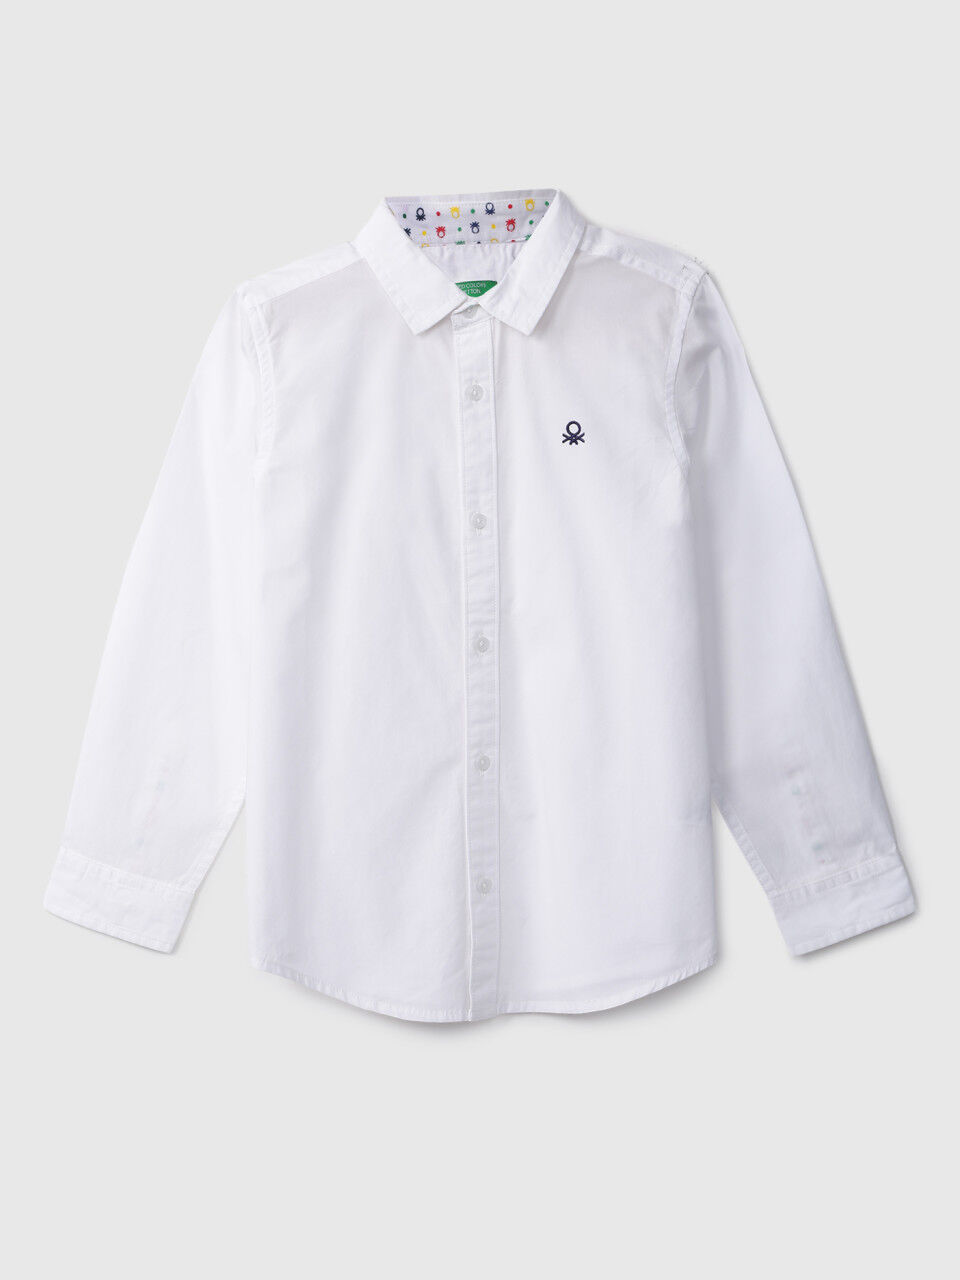 United Colors Of Benetton Boys White Solid Shirt